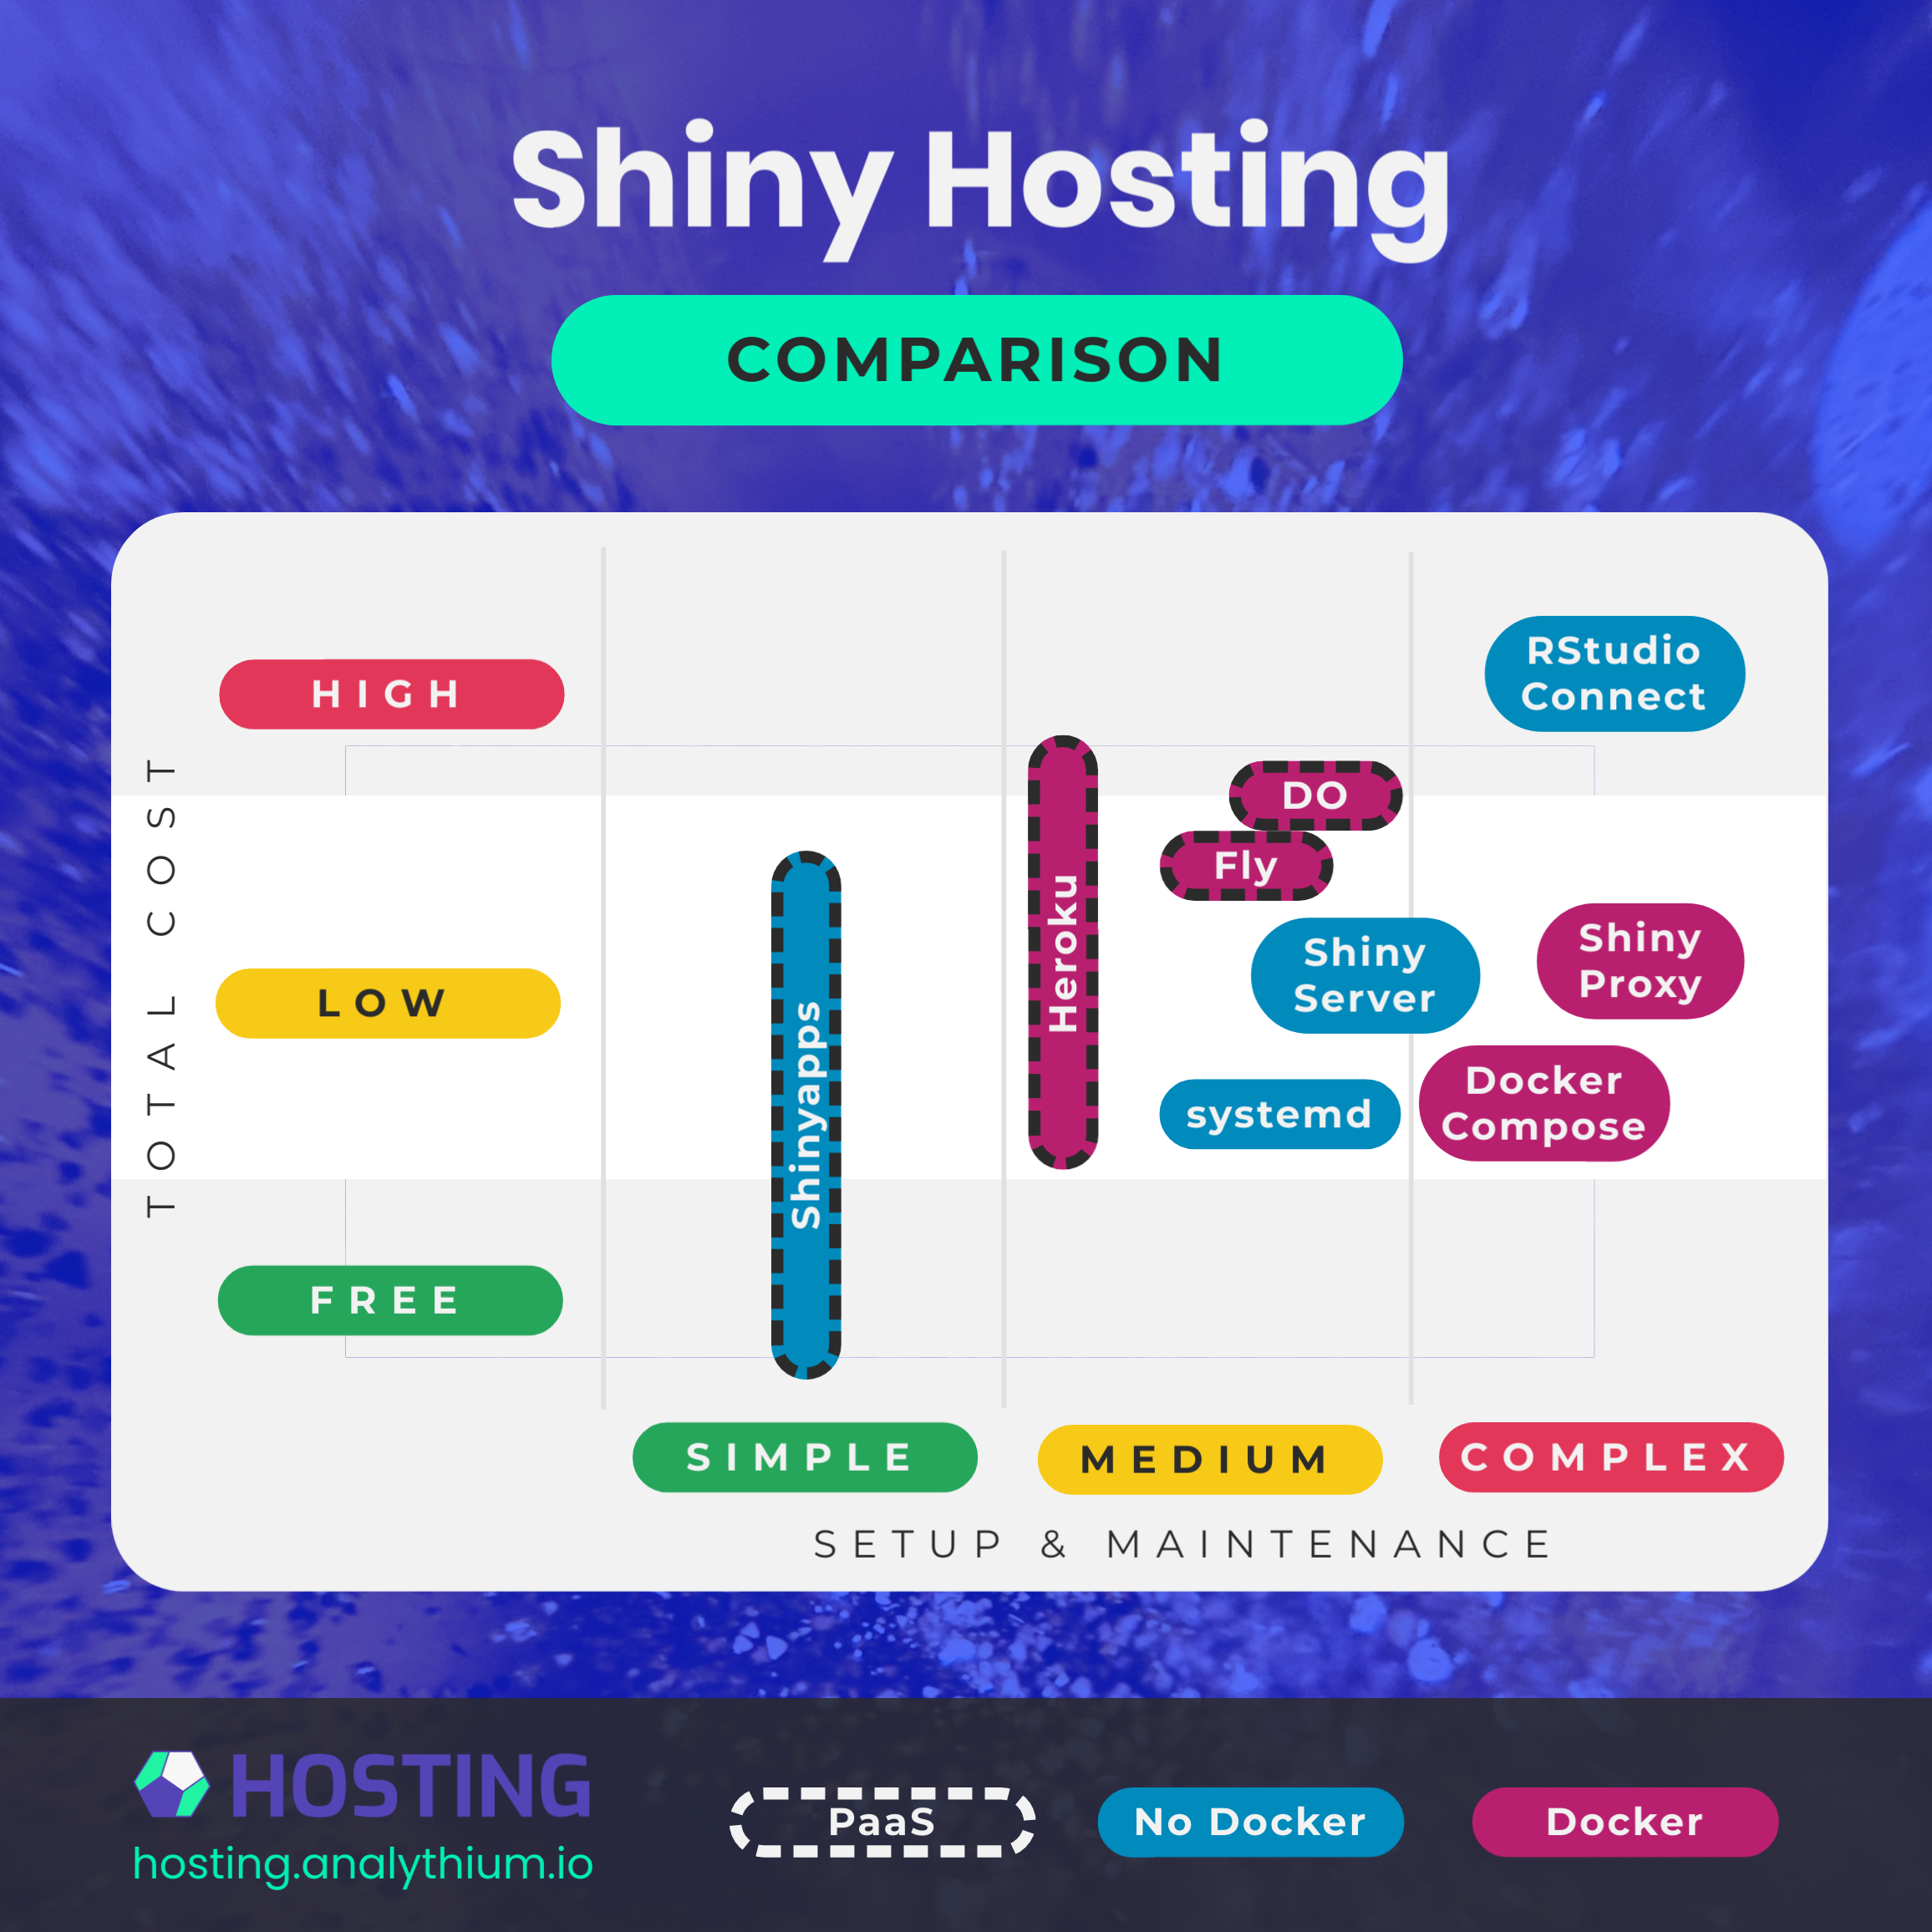 How to Pick the Right Hosting Option for Your Shiny App